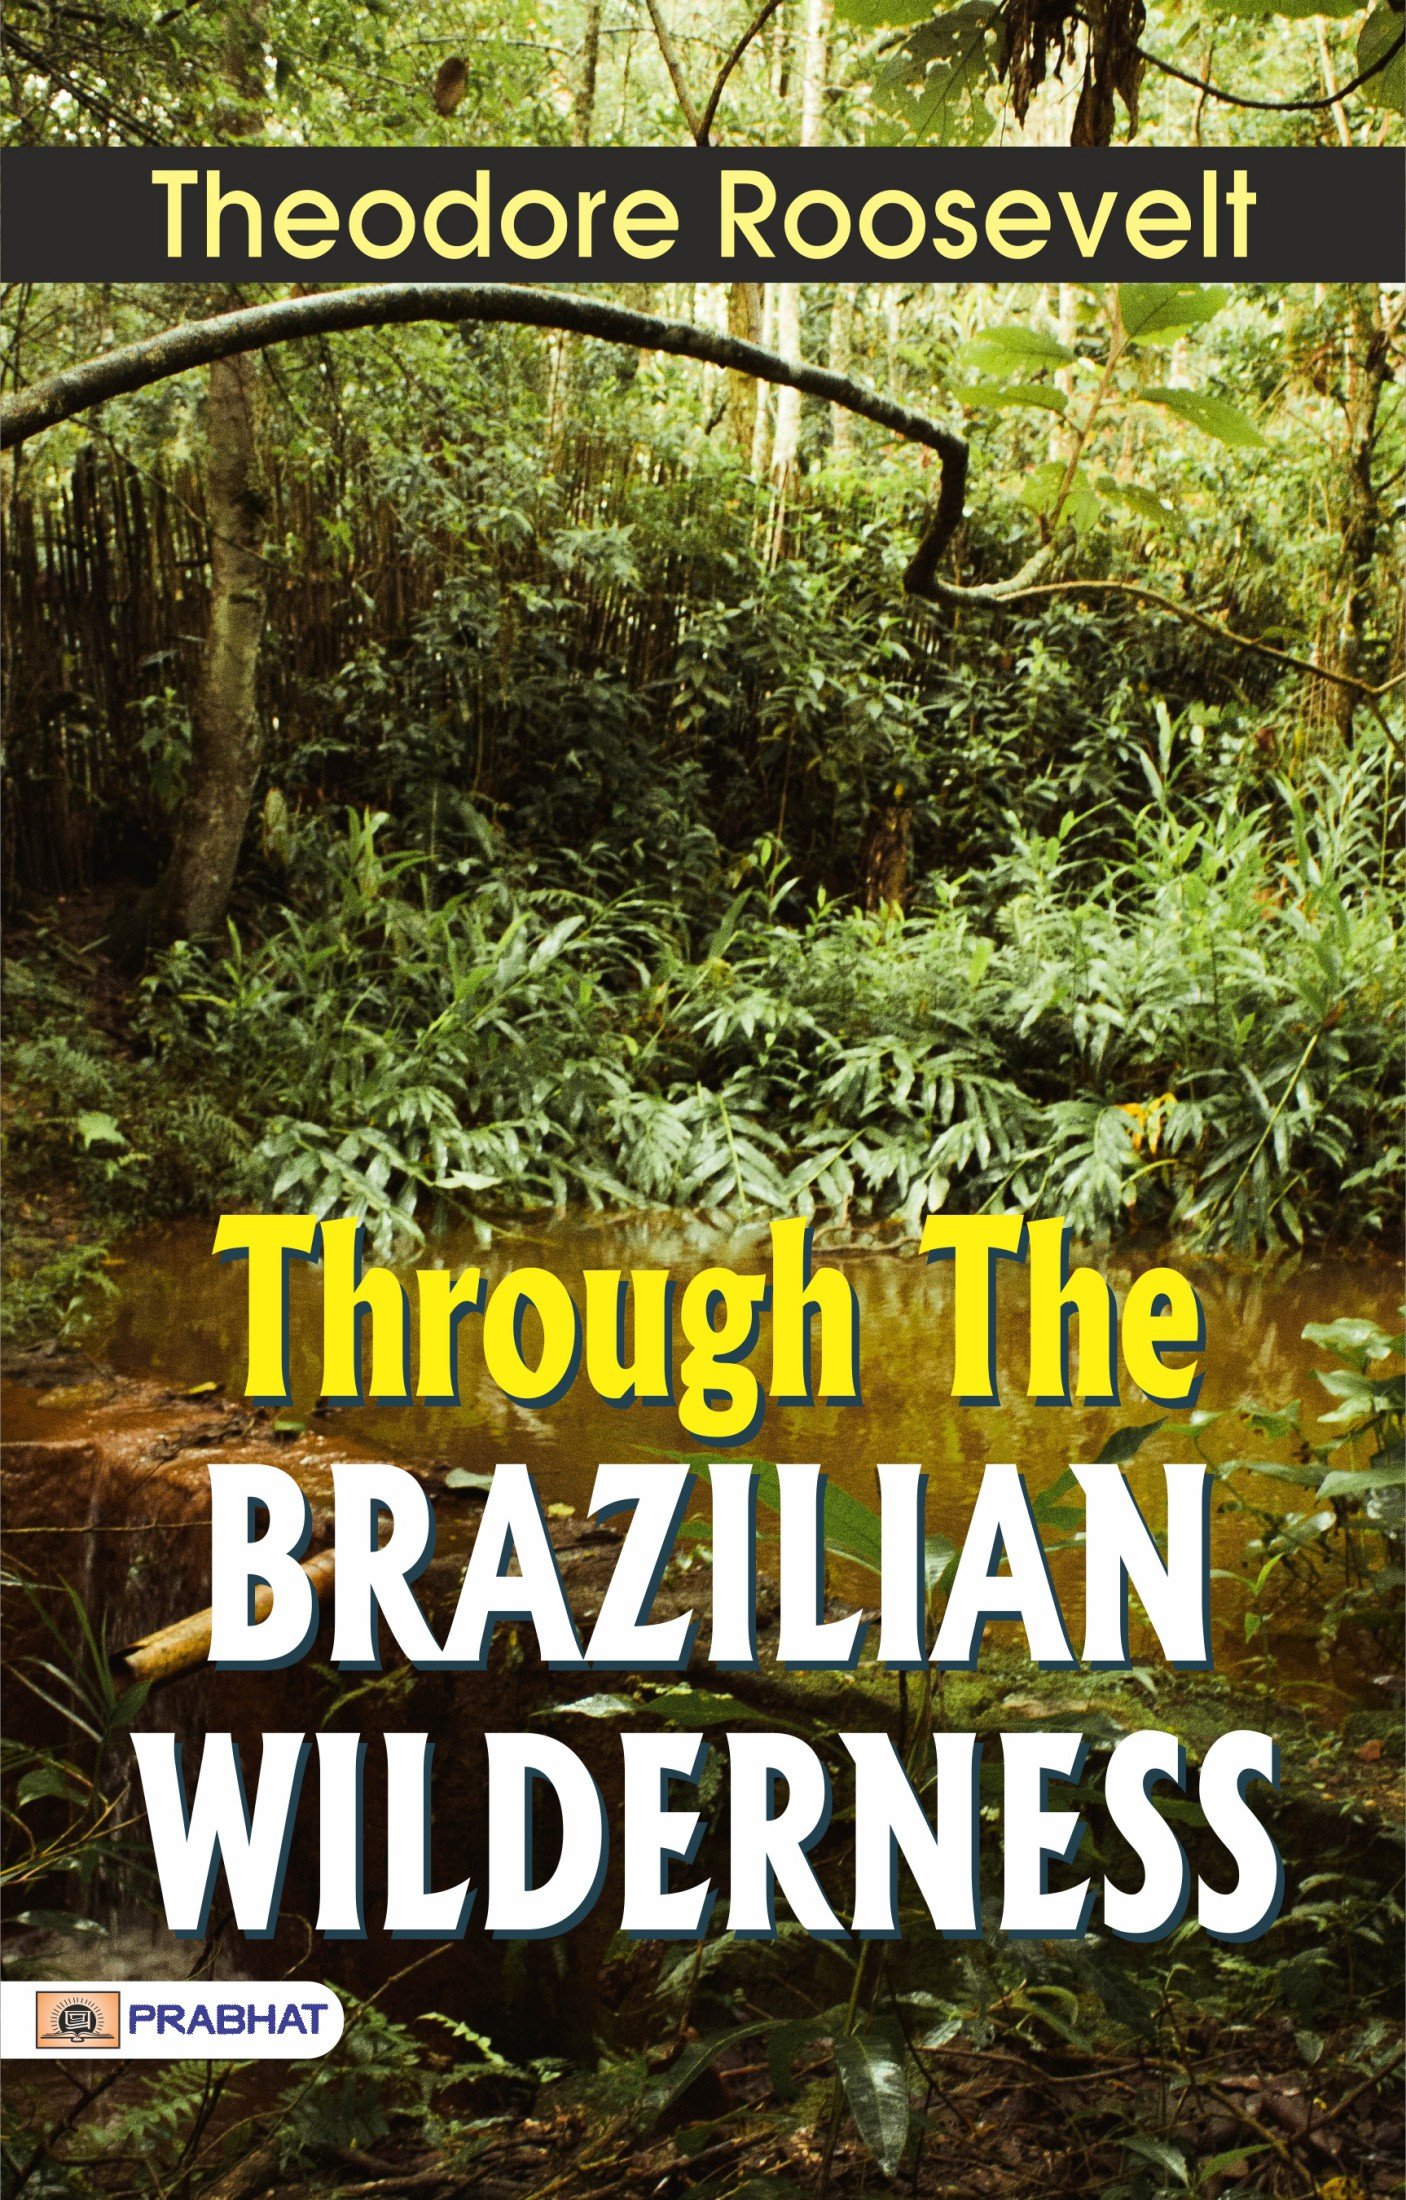 Through the Brazilian Wilderness: Theodore Roosevelt's Daring Exploration of the Amazon by Theodore Roosevelt